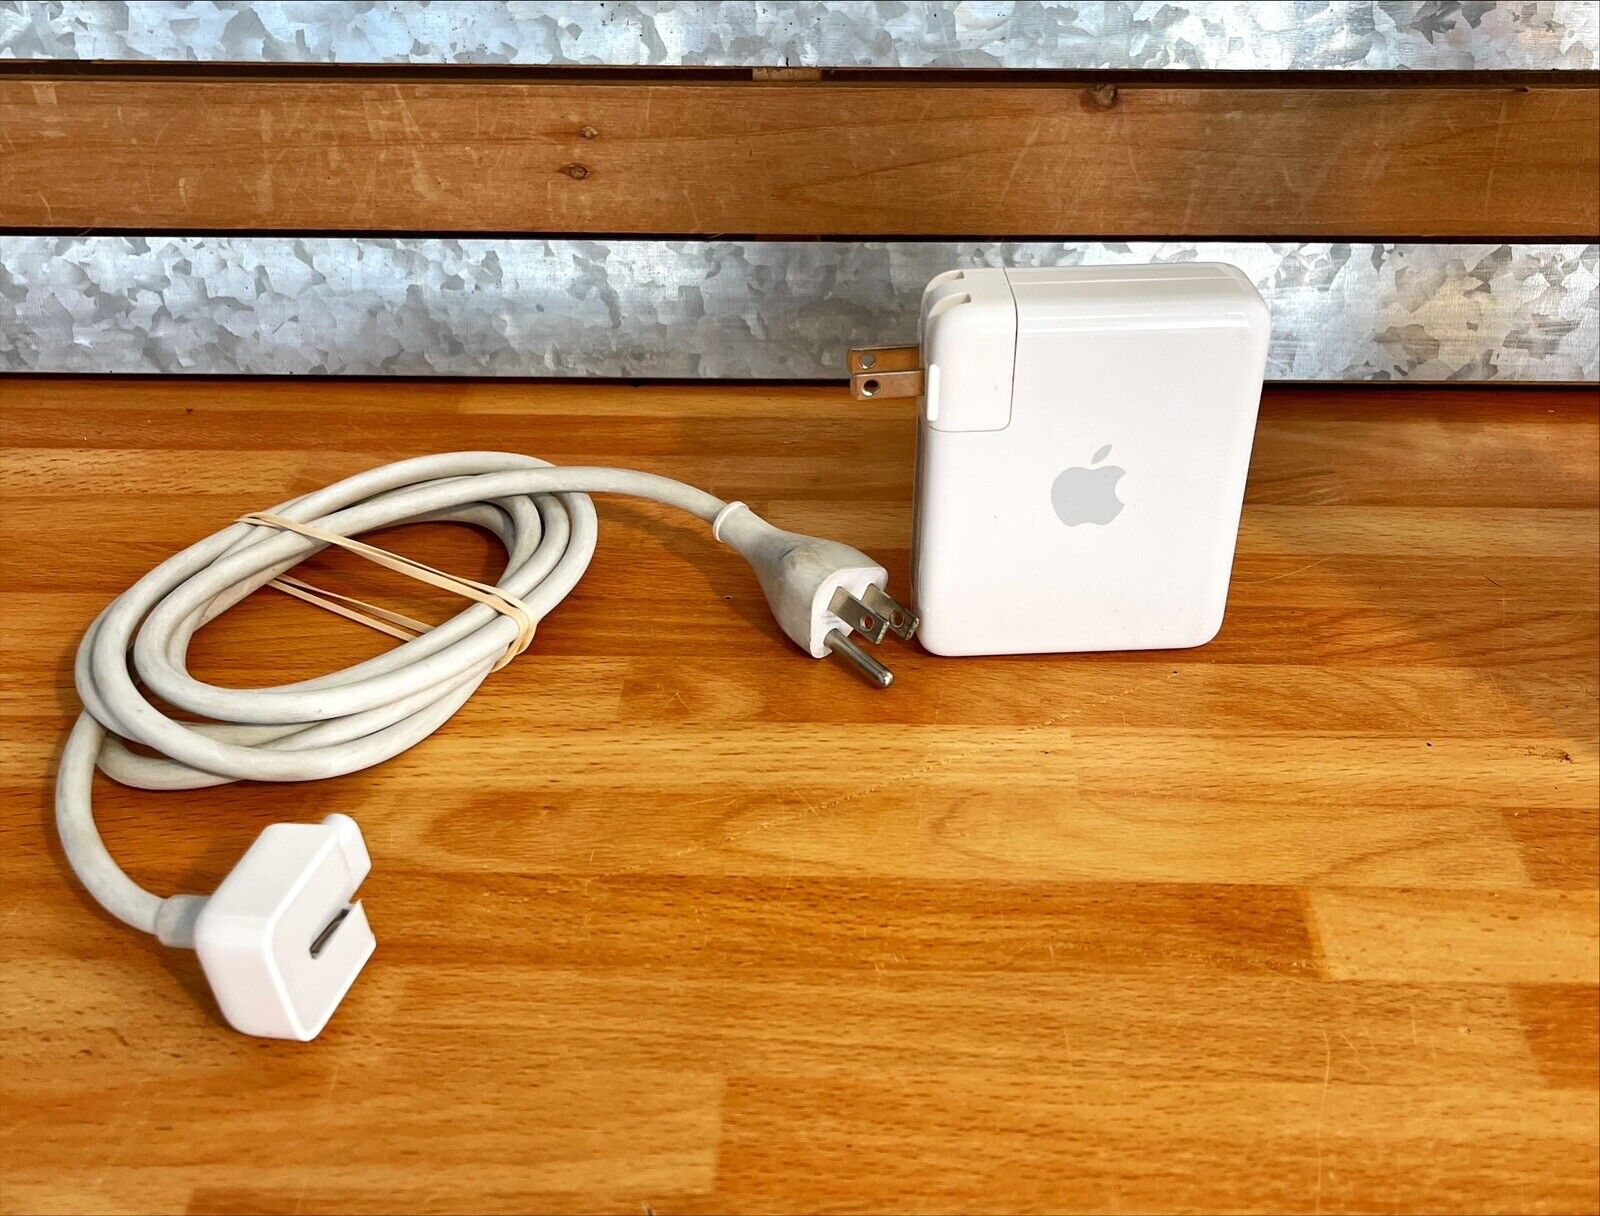 Apple AirPort Express Wi-Fi Base Station Model A1084 With Extra Extended Cord